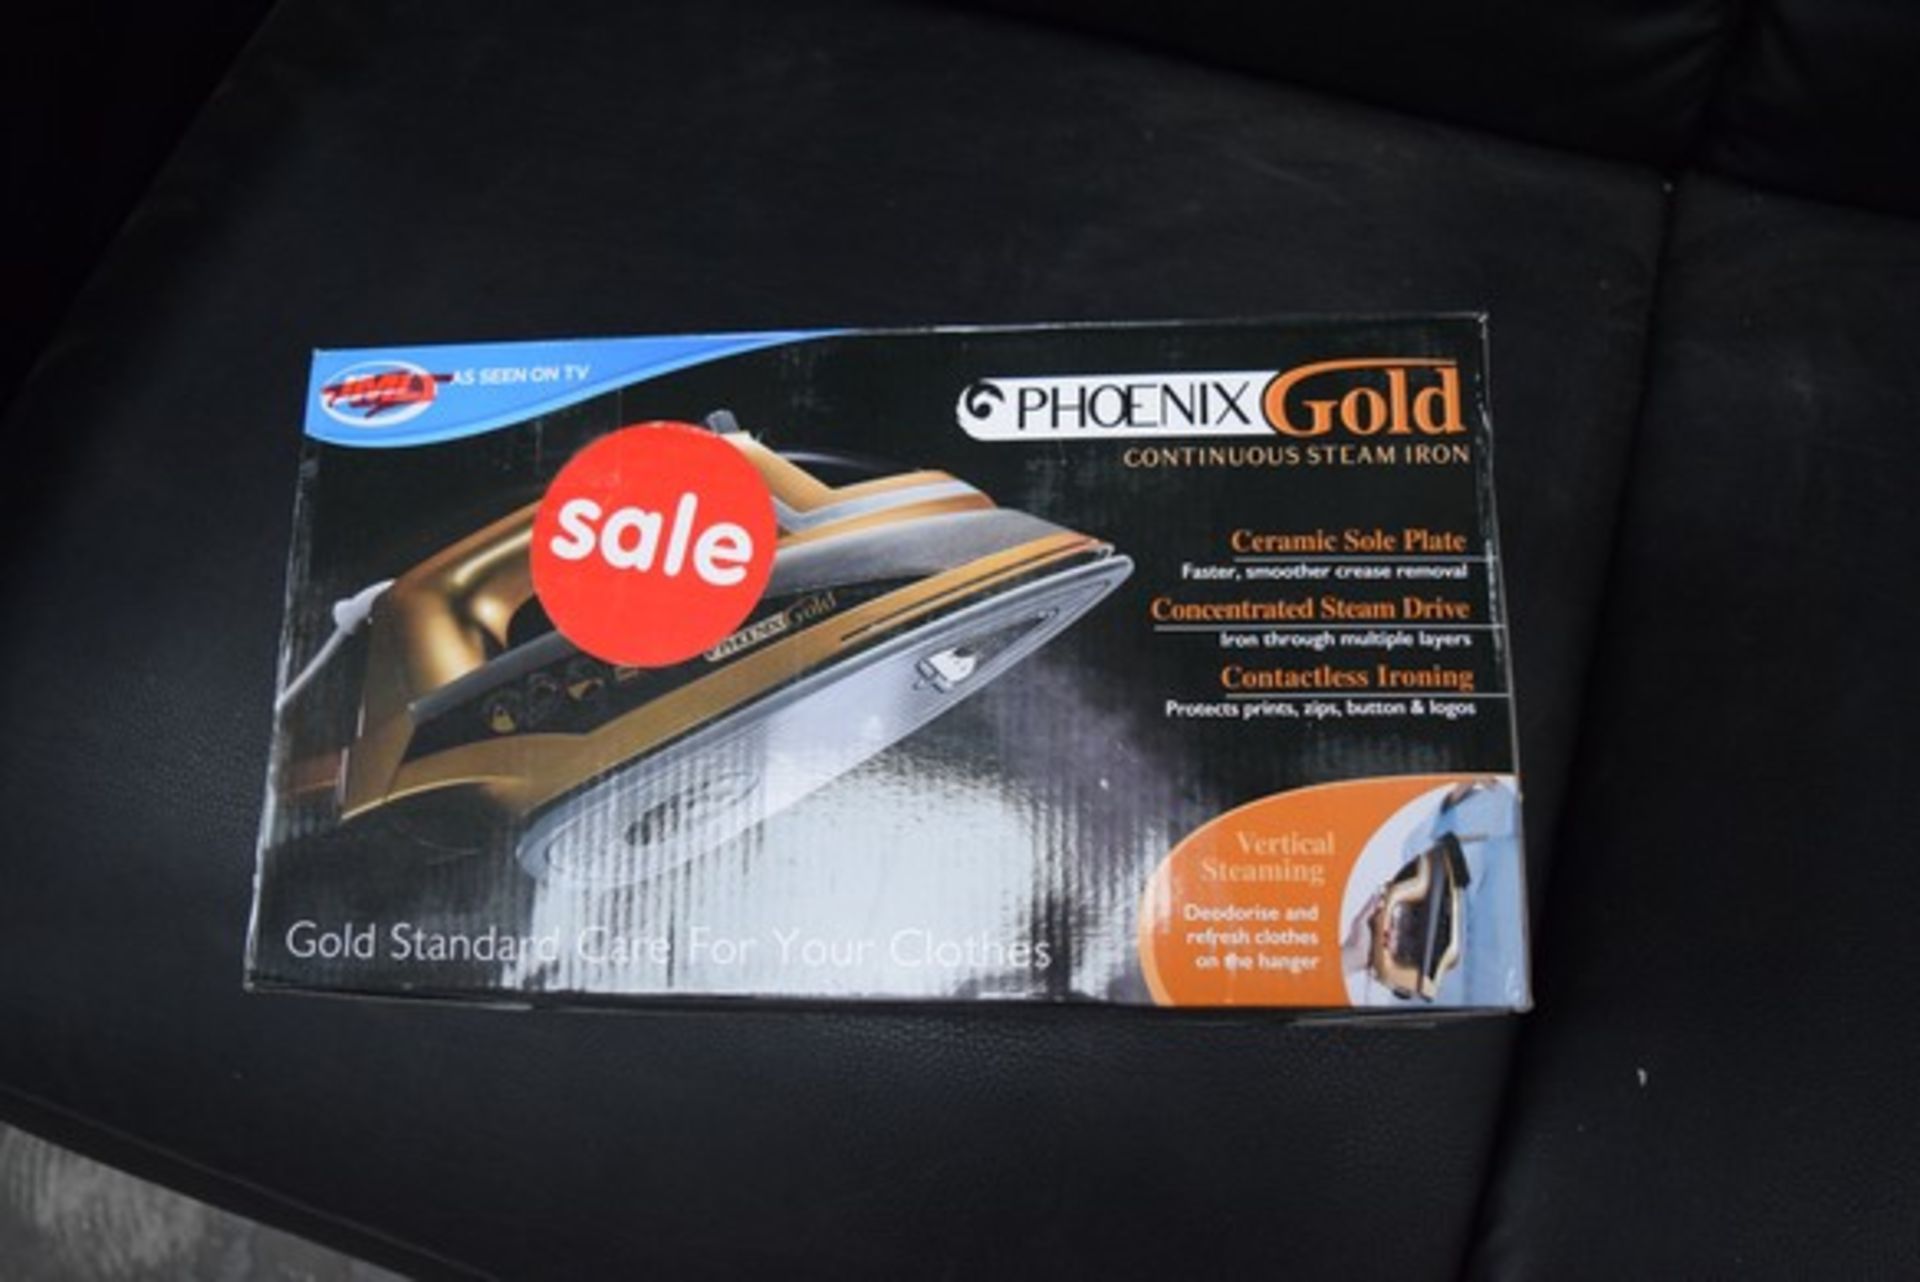 1 x BOXED PHOENIX GOLD CONTINUOUS STEAM IRON RRP £40 10.07.17 *PLEASE NOTE THAT THE BID PRICE IS